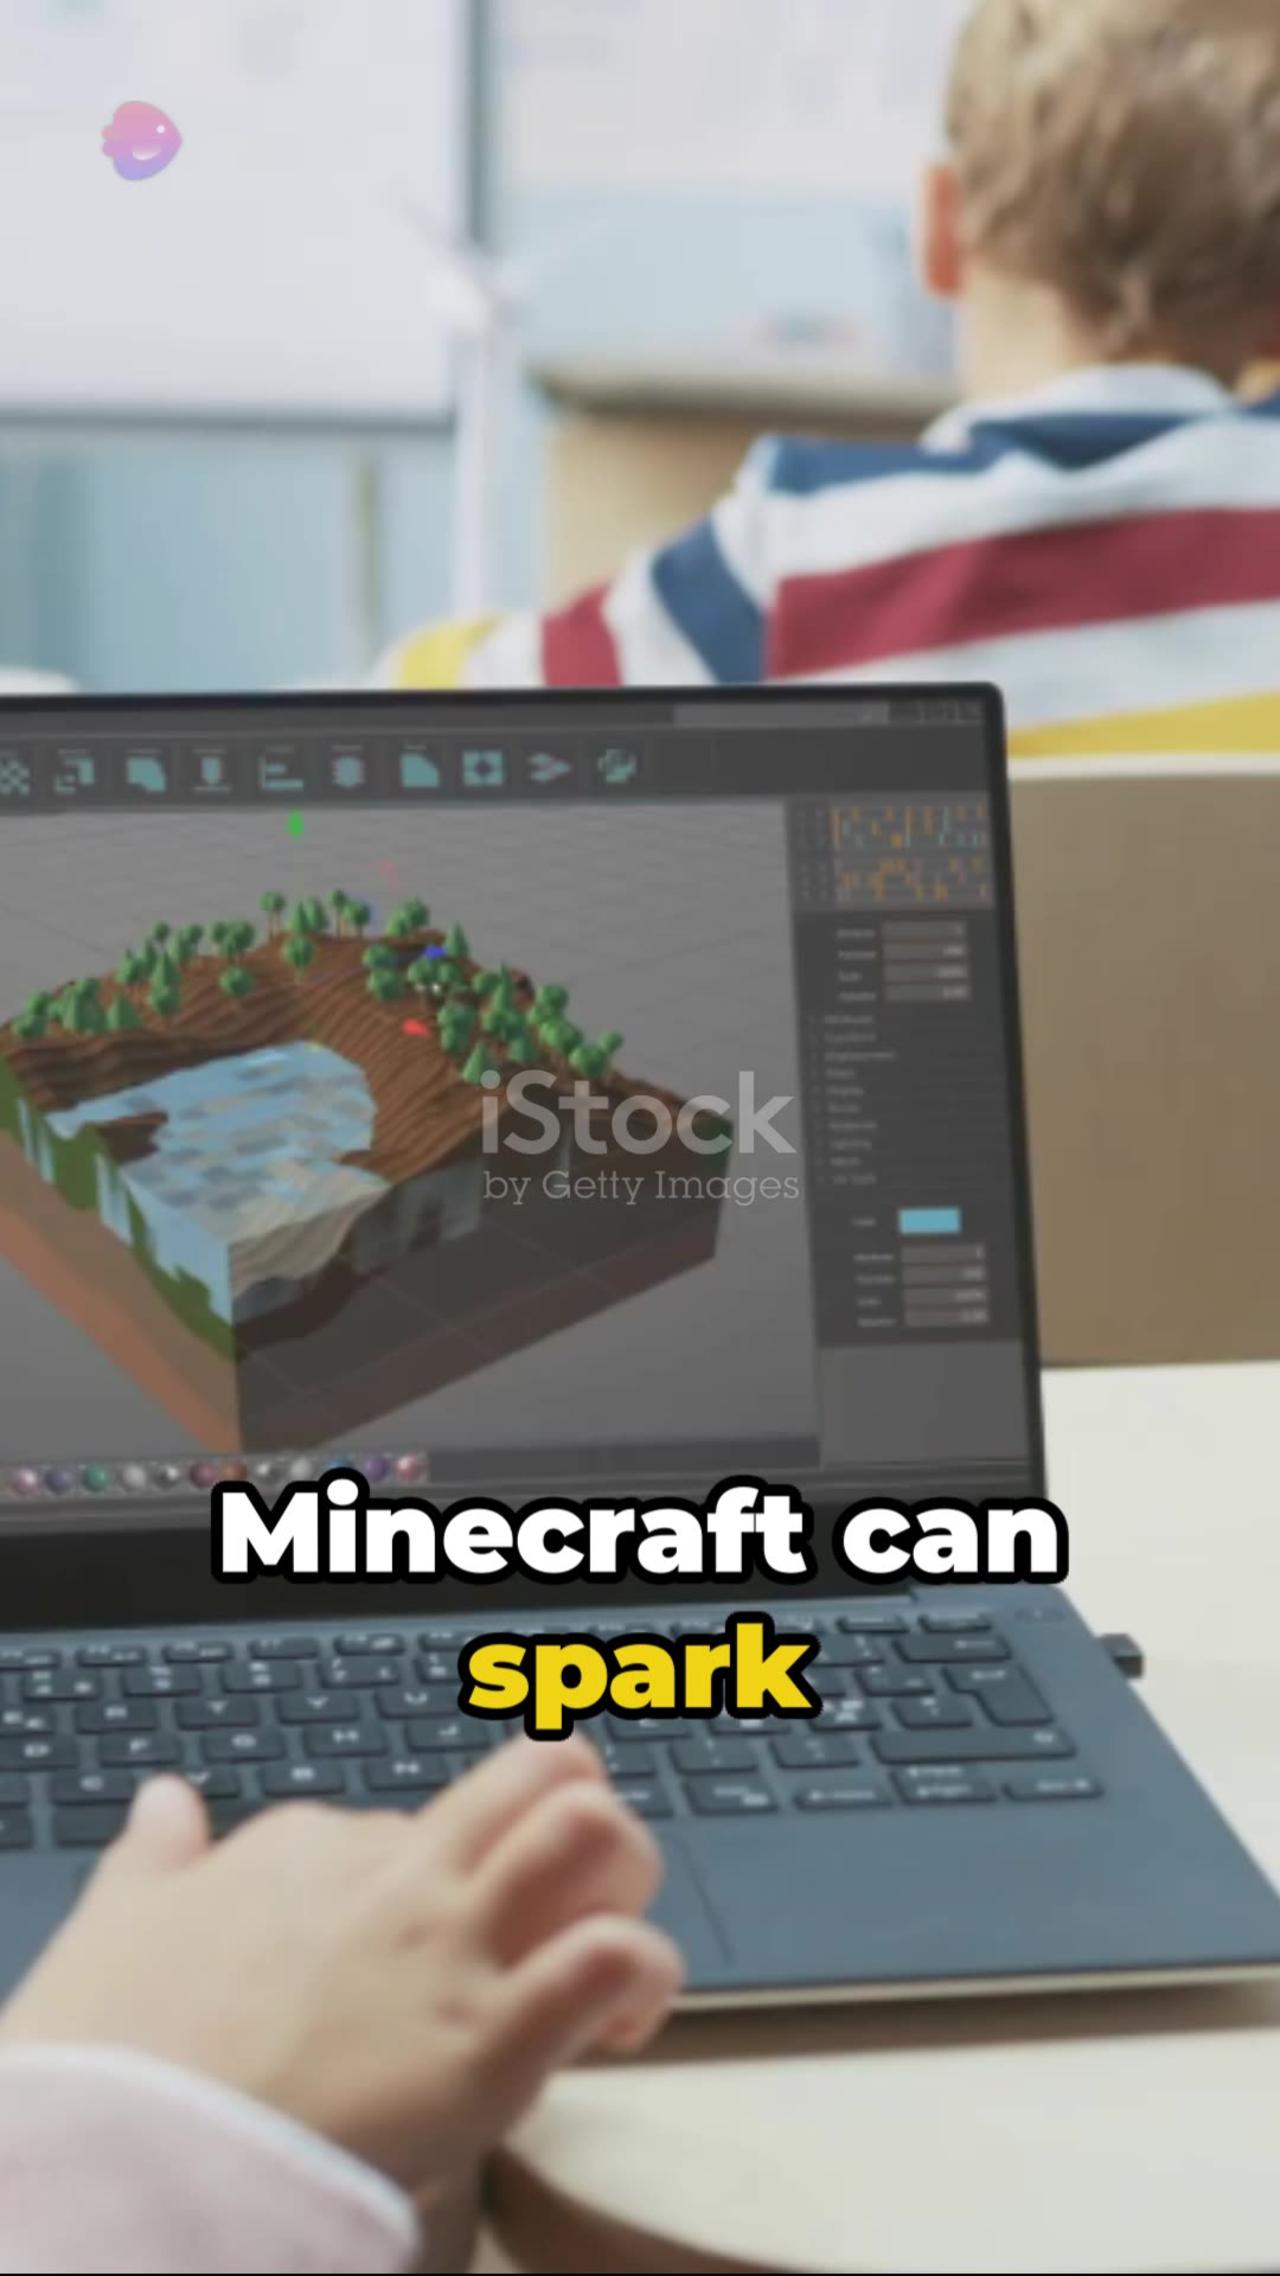 Minecraft: More than Just a Game